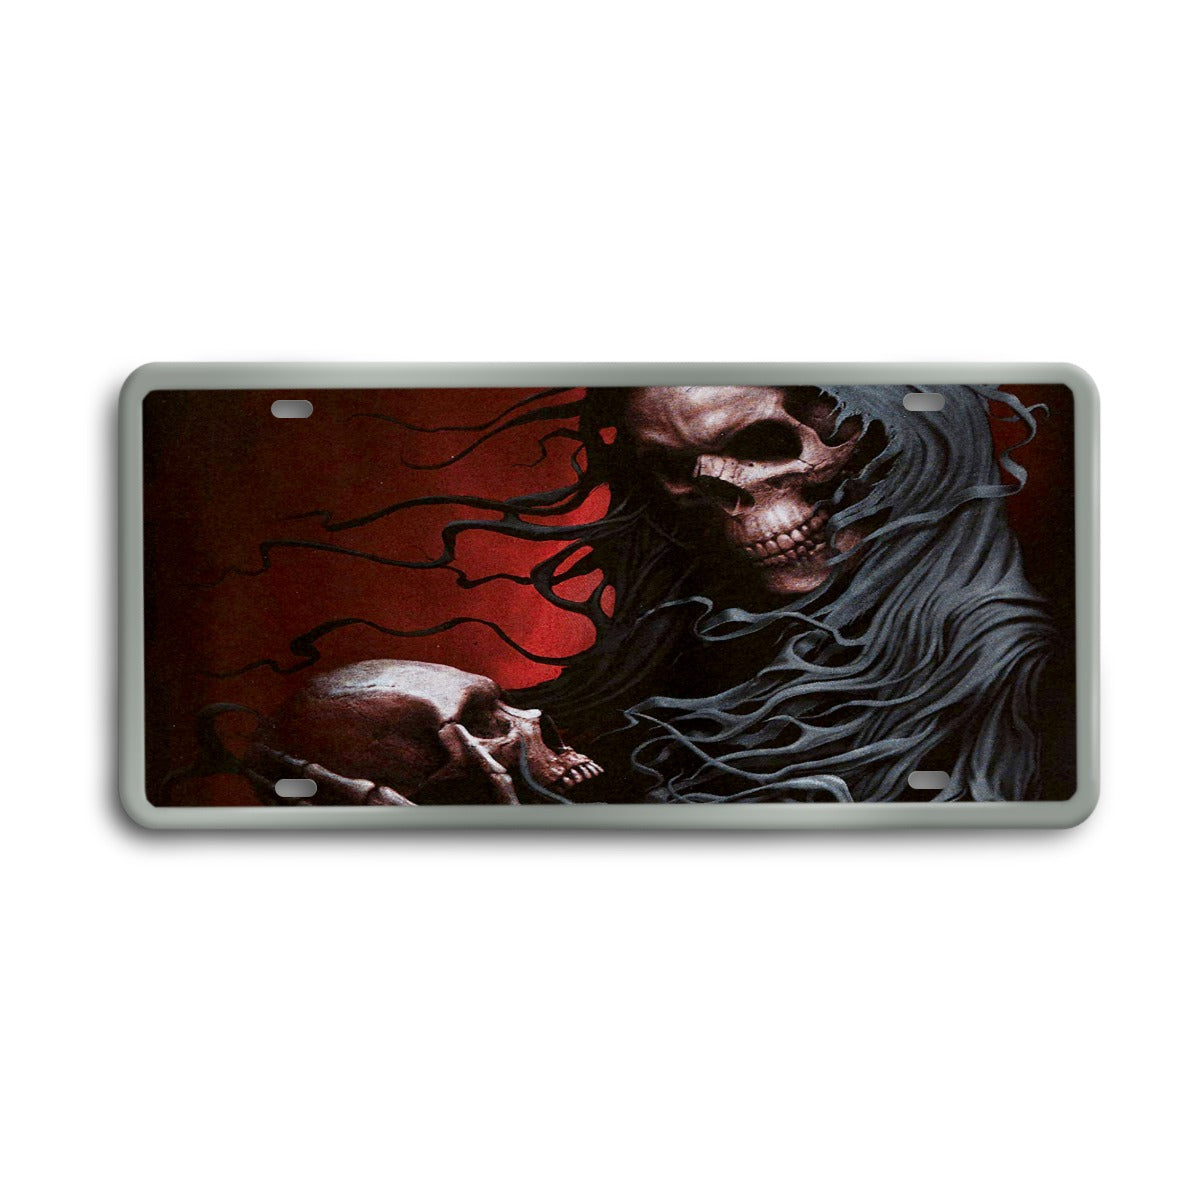 Gothic Grim reaper halloween Vintage License Plate Decoration Painting